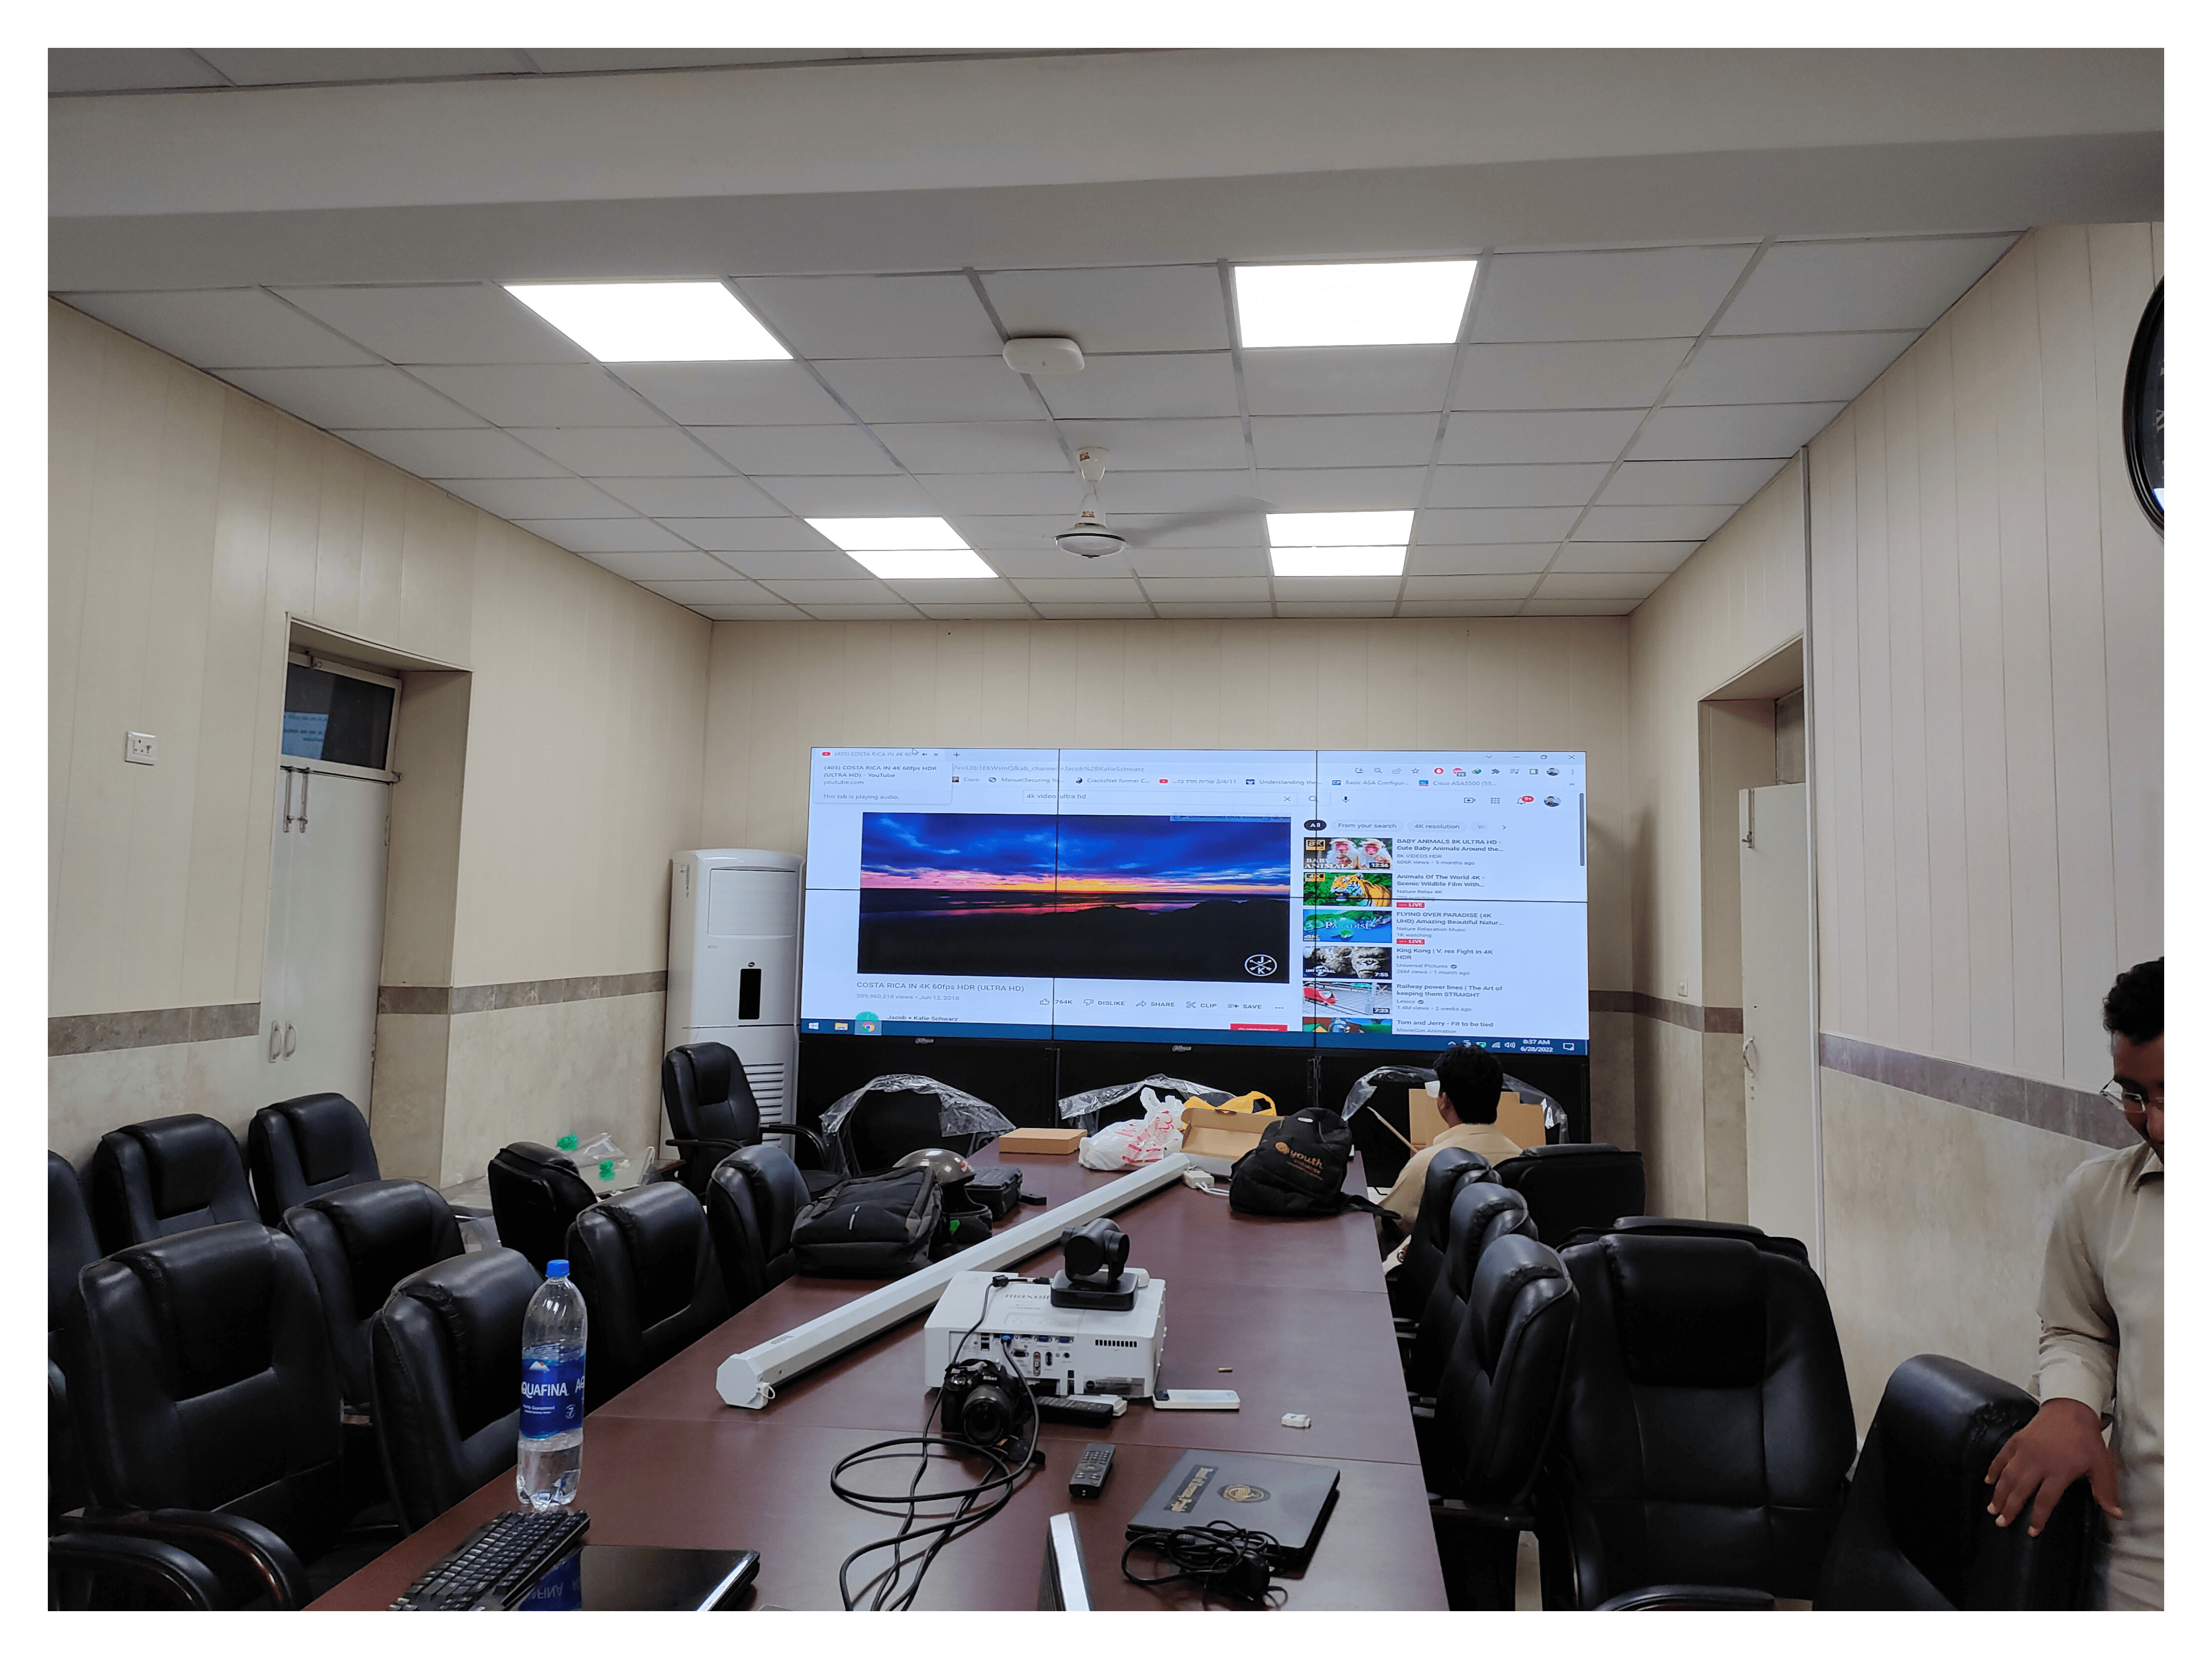 A conference room with a large LCD Video Wall screen displayed for presentations and meetings. Installed By EziSol.